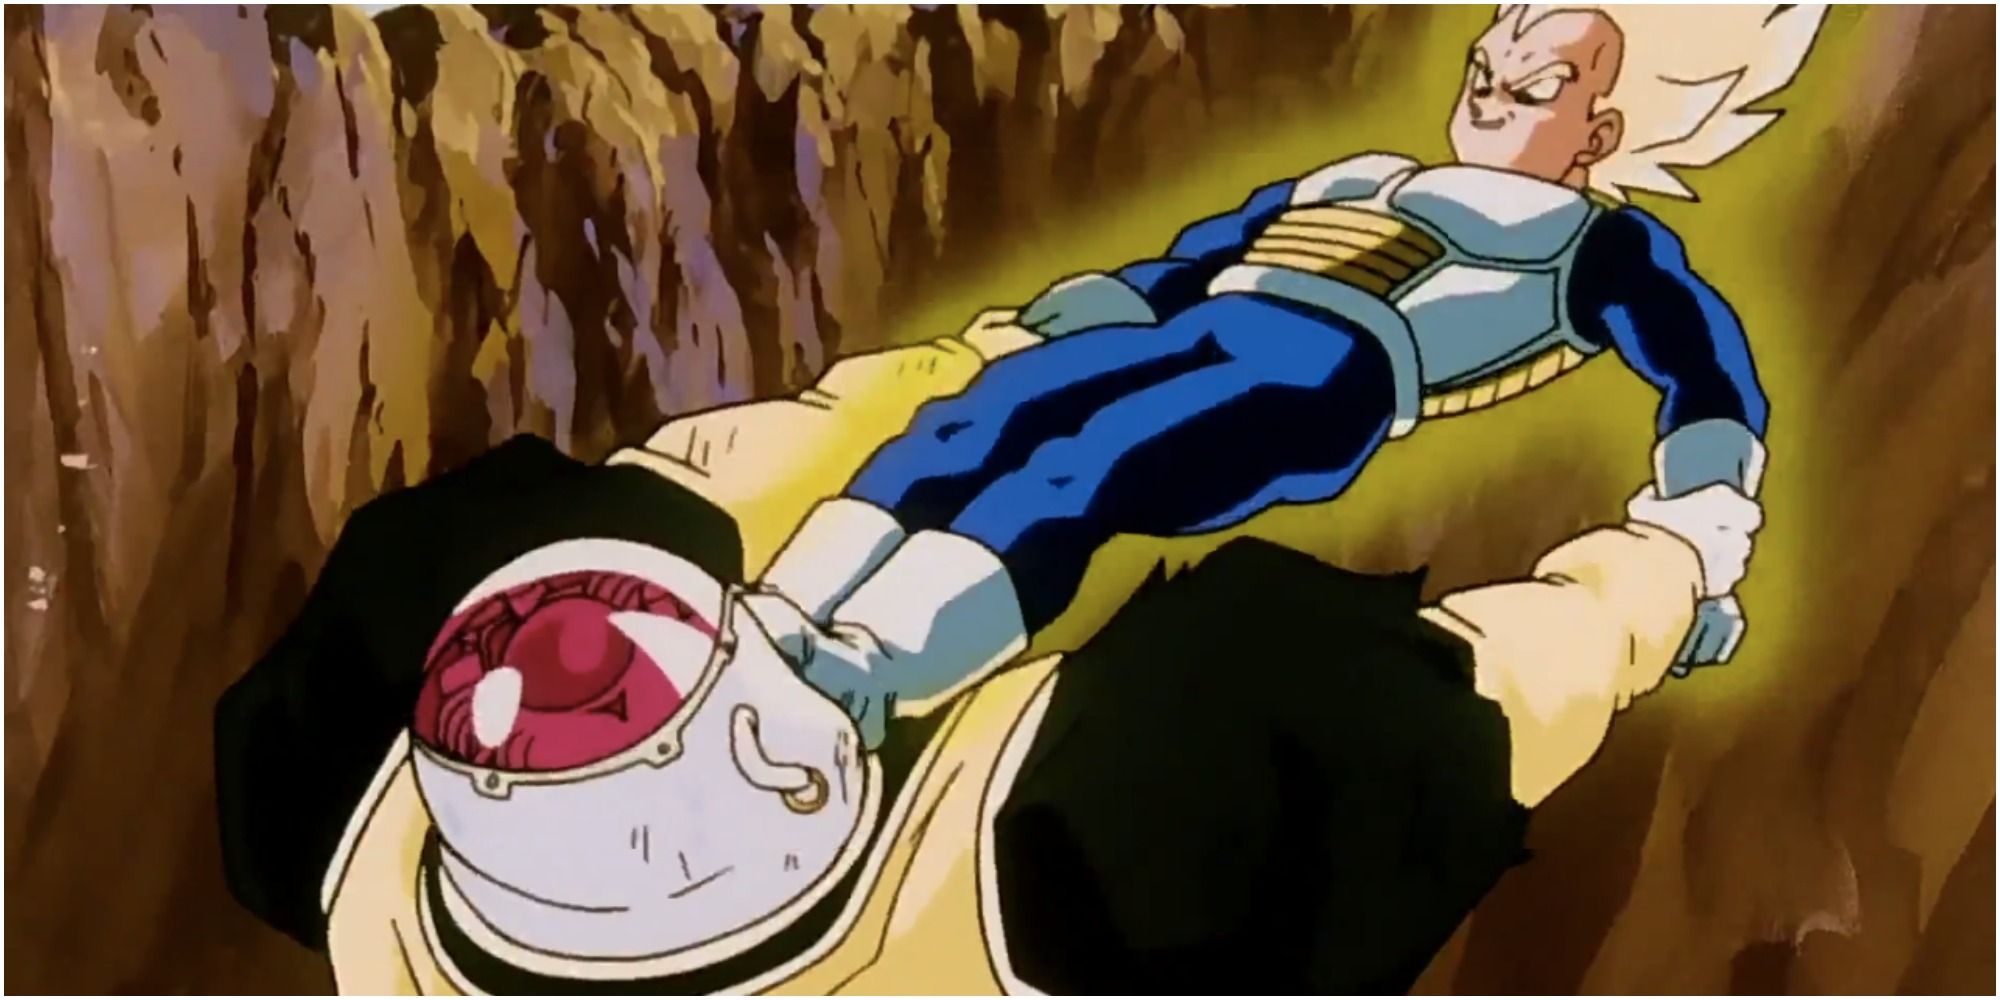 Vegeta defeats Android 19 in Dragon Ball Z